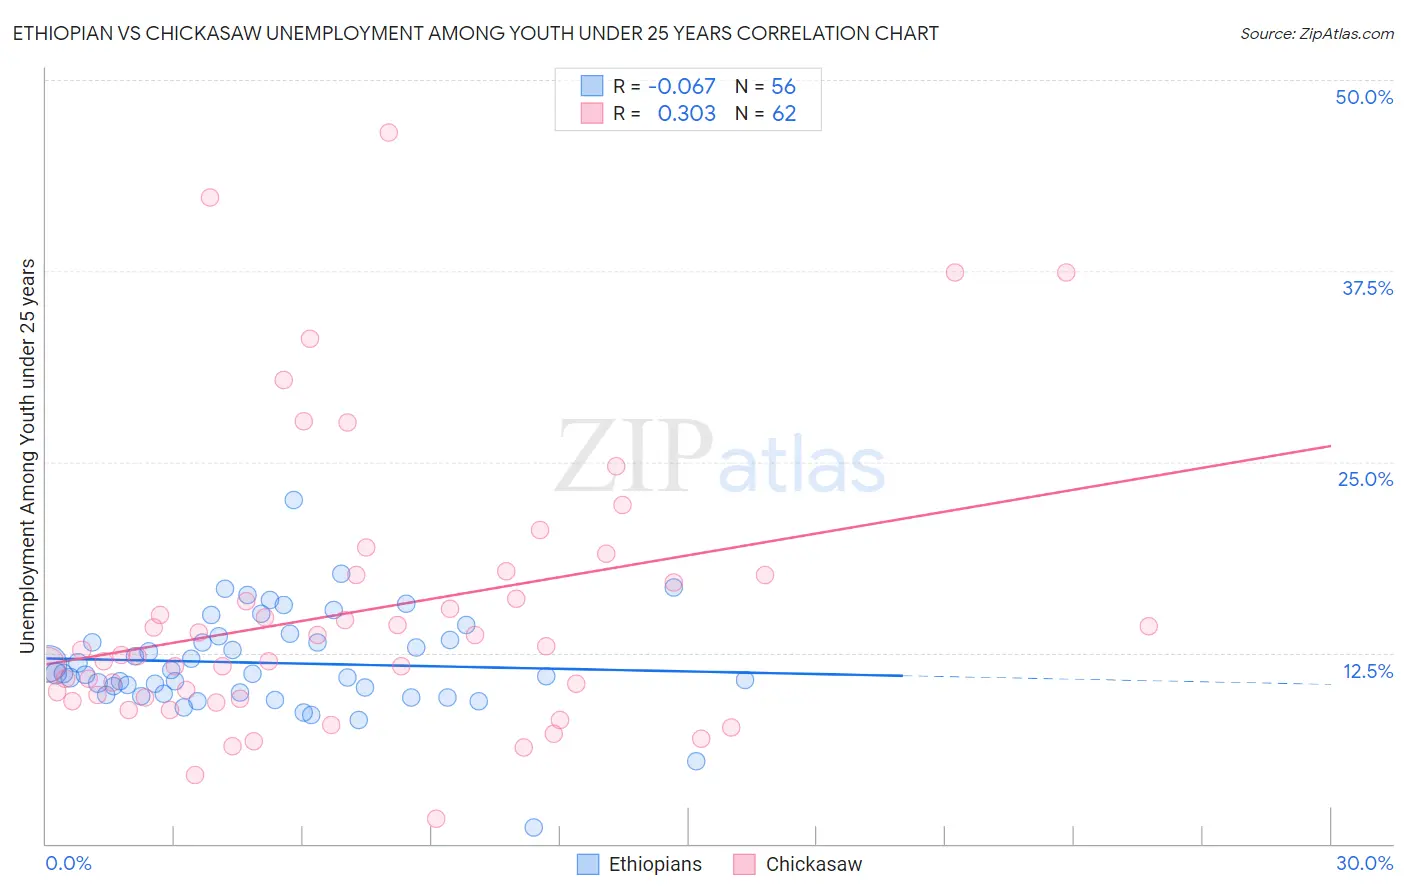 Ethiopian vs Chickasaw Unemployment Among Youth under 25 years